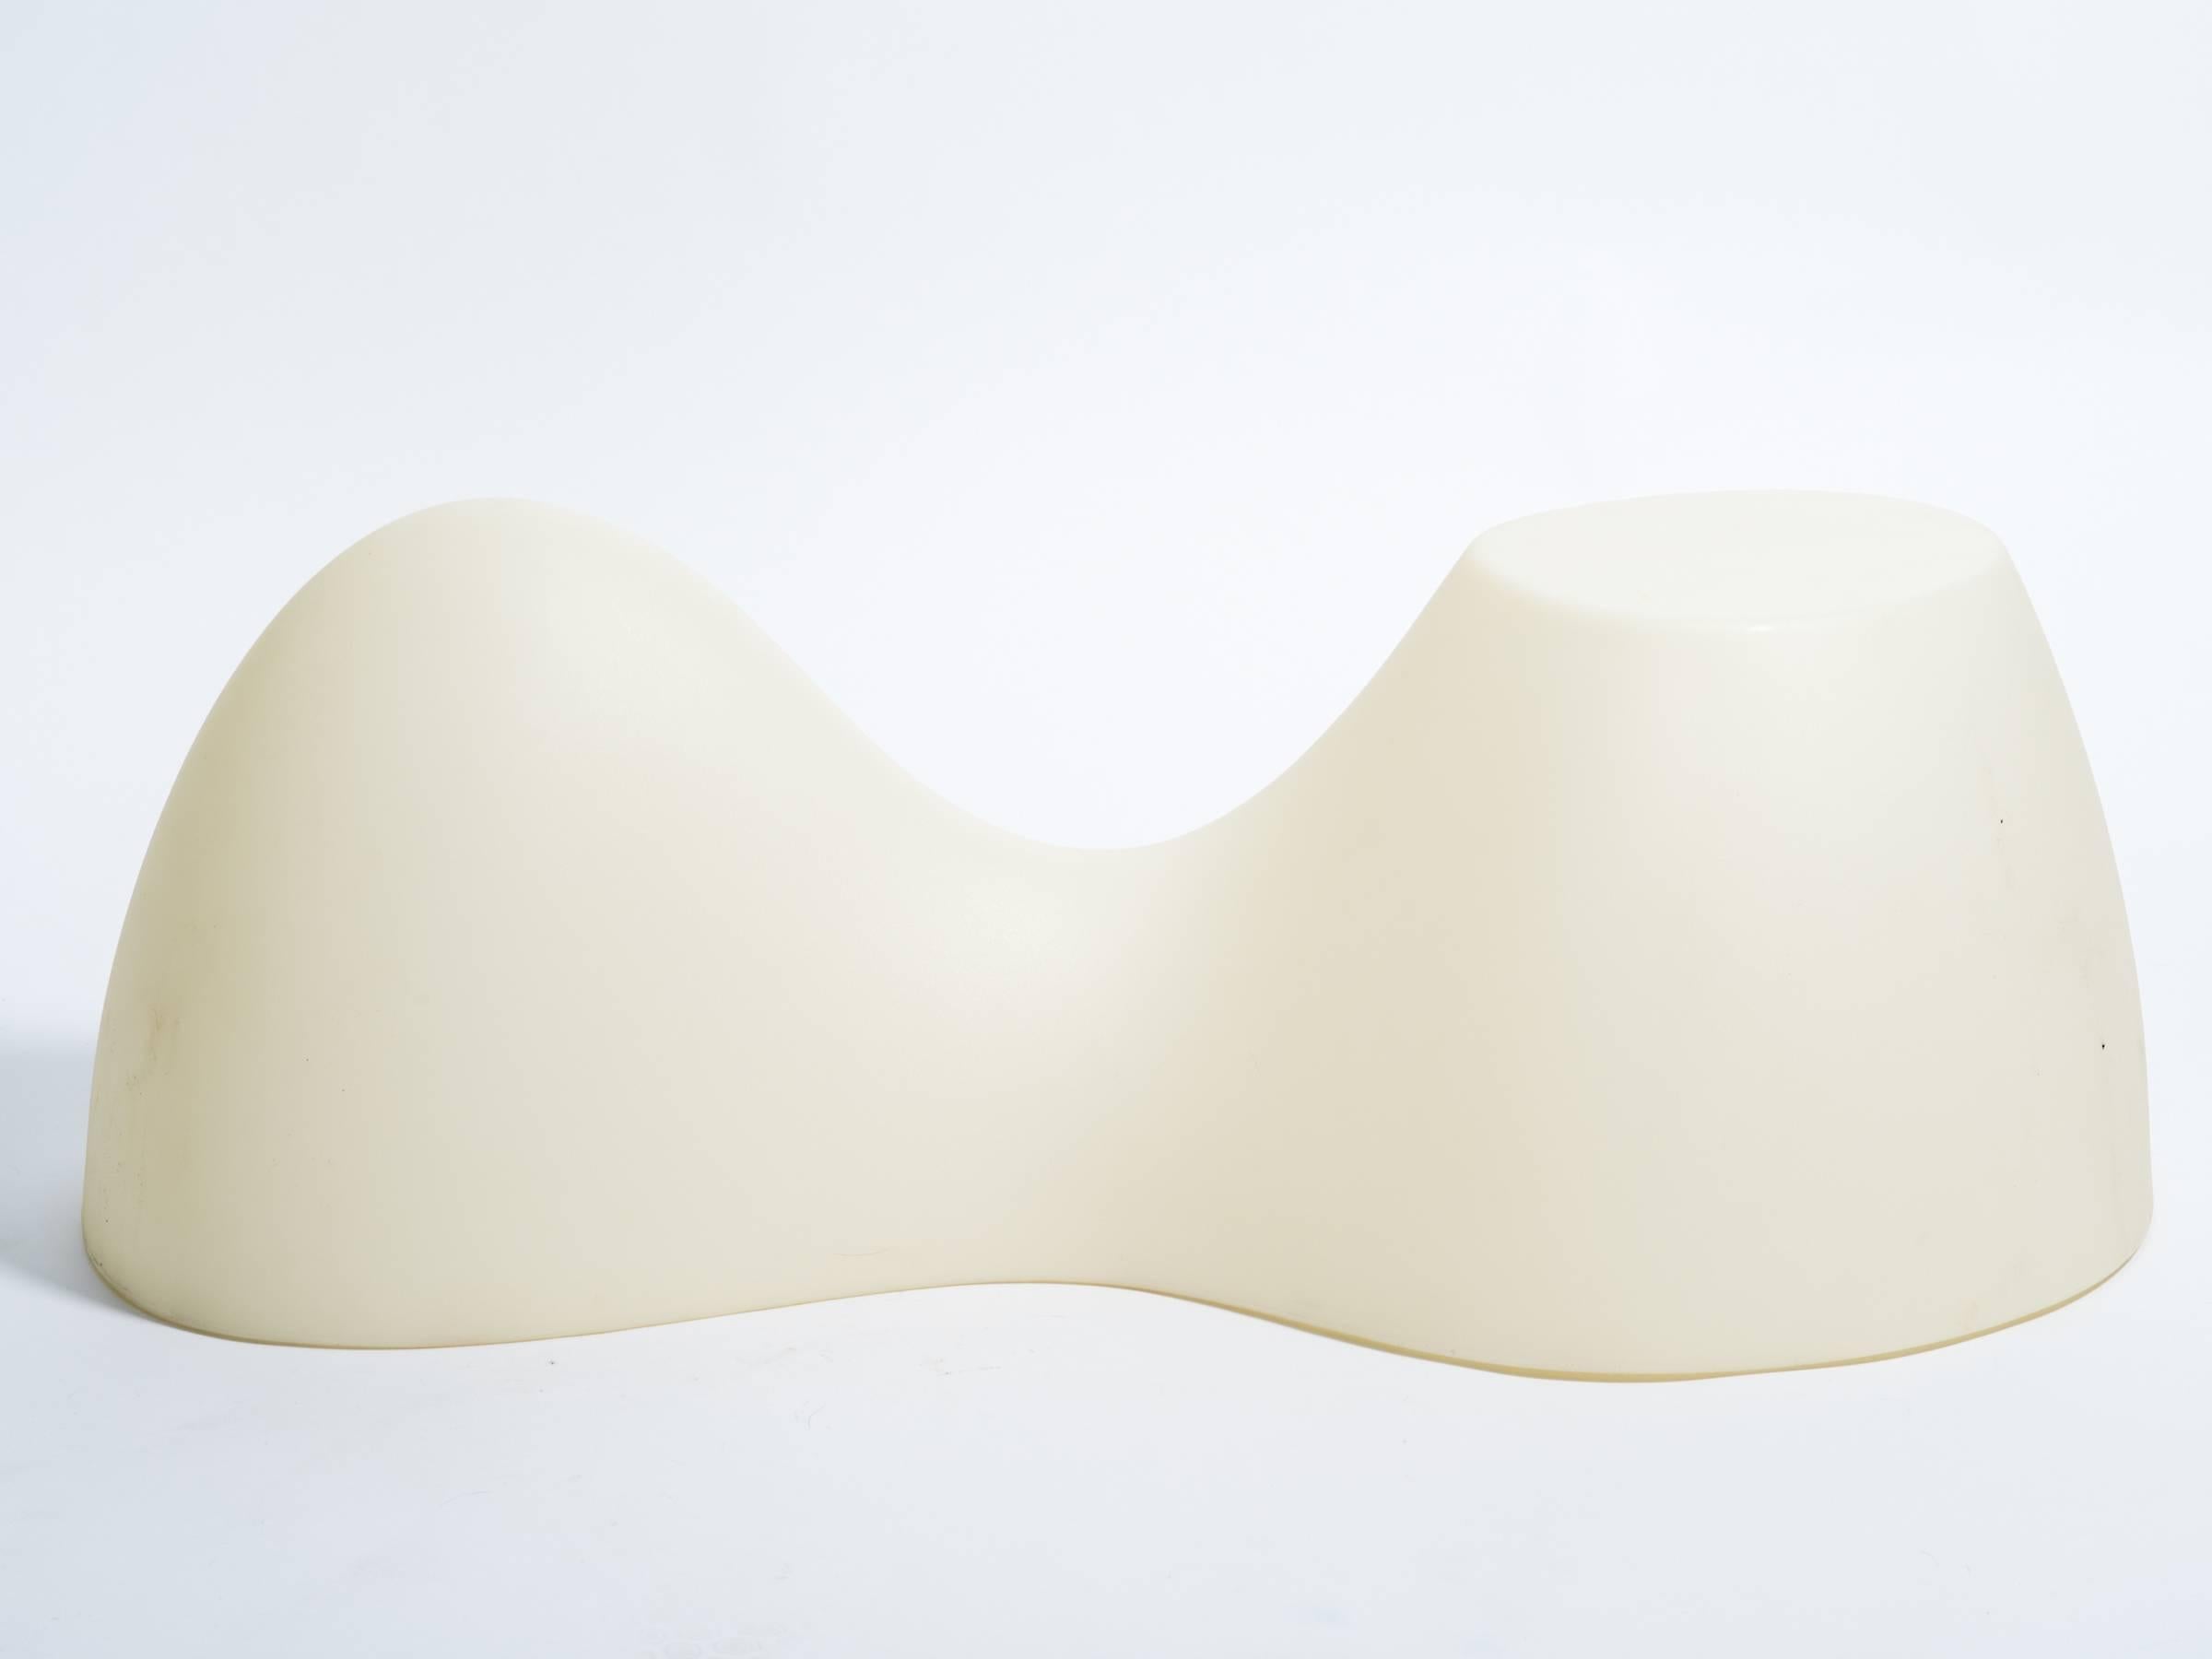 The Foscarini Blob light transforms rooms with a soft illumination. Can also be used to sit on. Created by Karim Rashid in 2002. This item was never used.